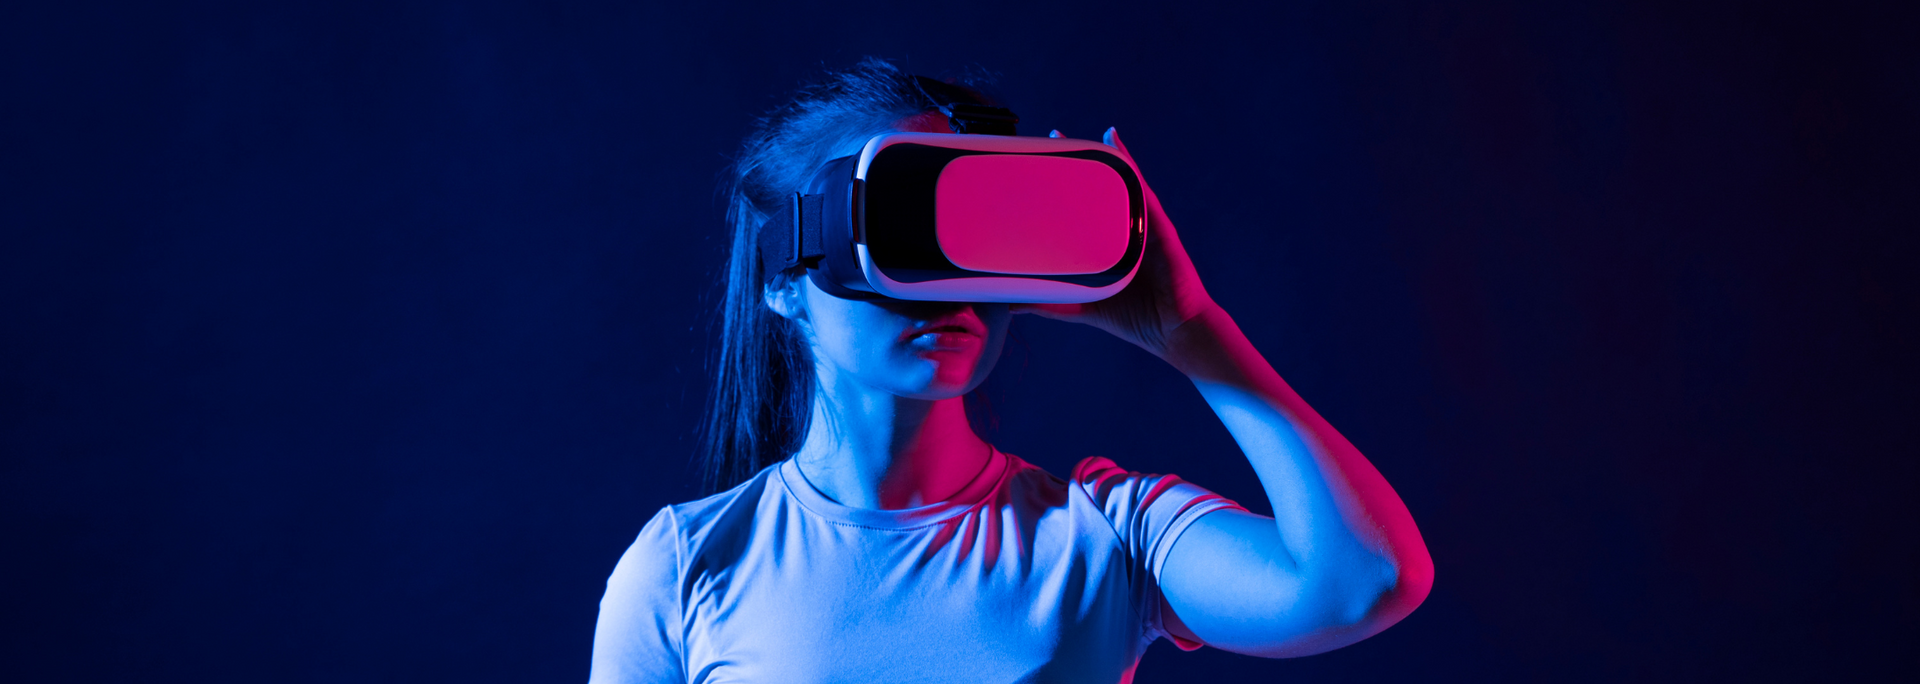 picture of a Person wearing a VR headset